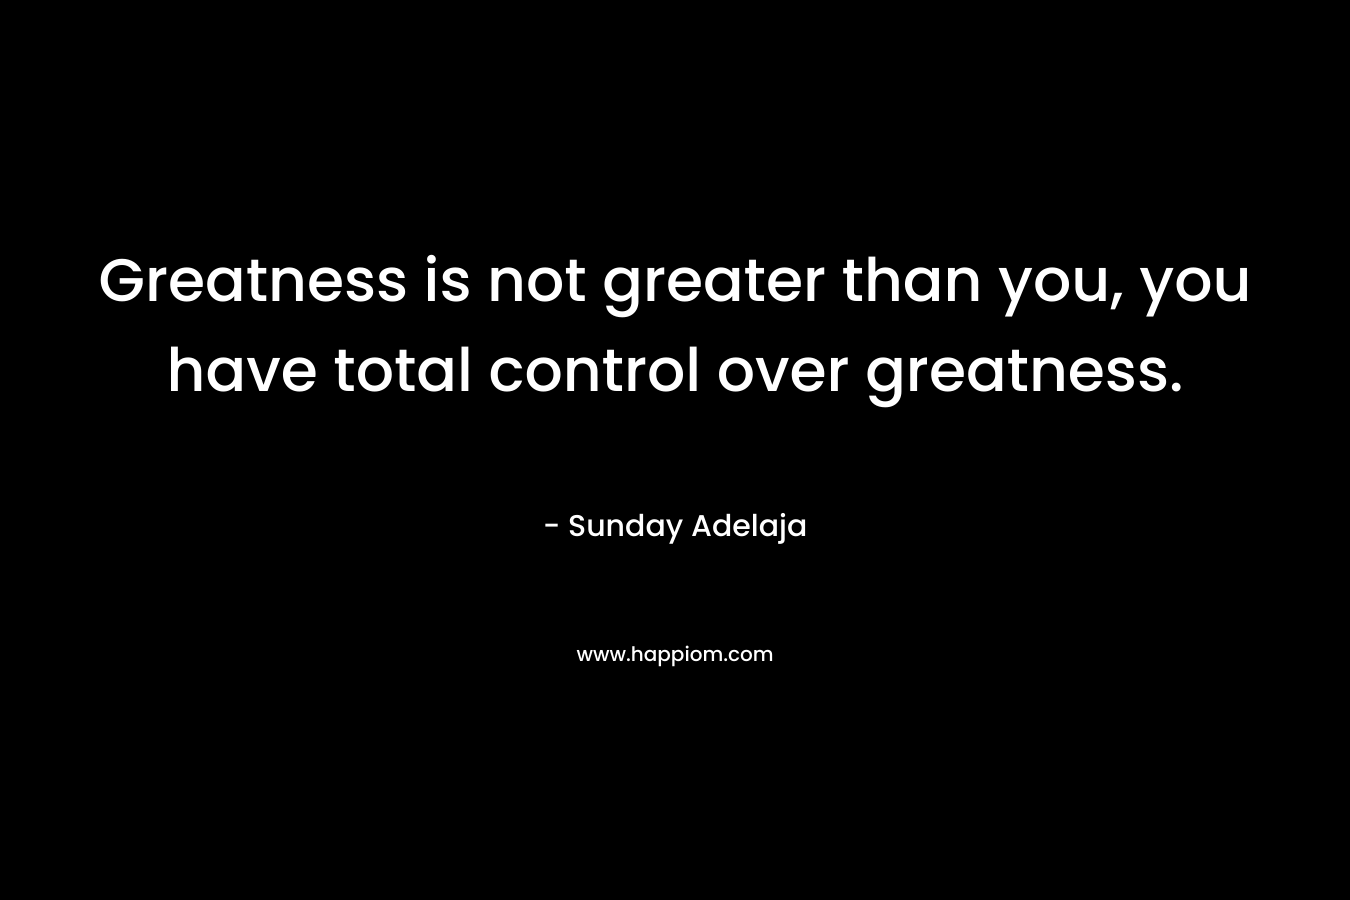 Greatness is not greater than you, you have total control over greatness.